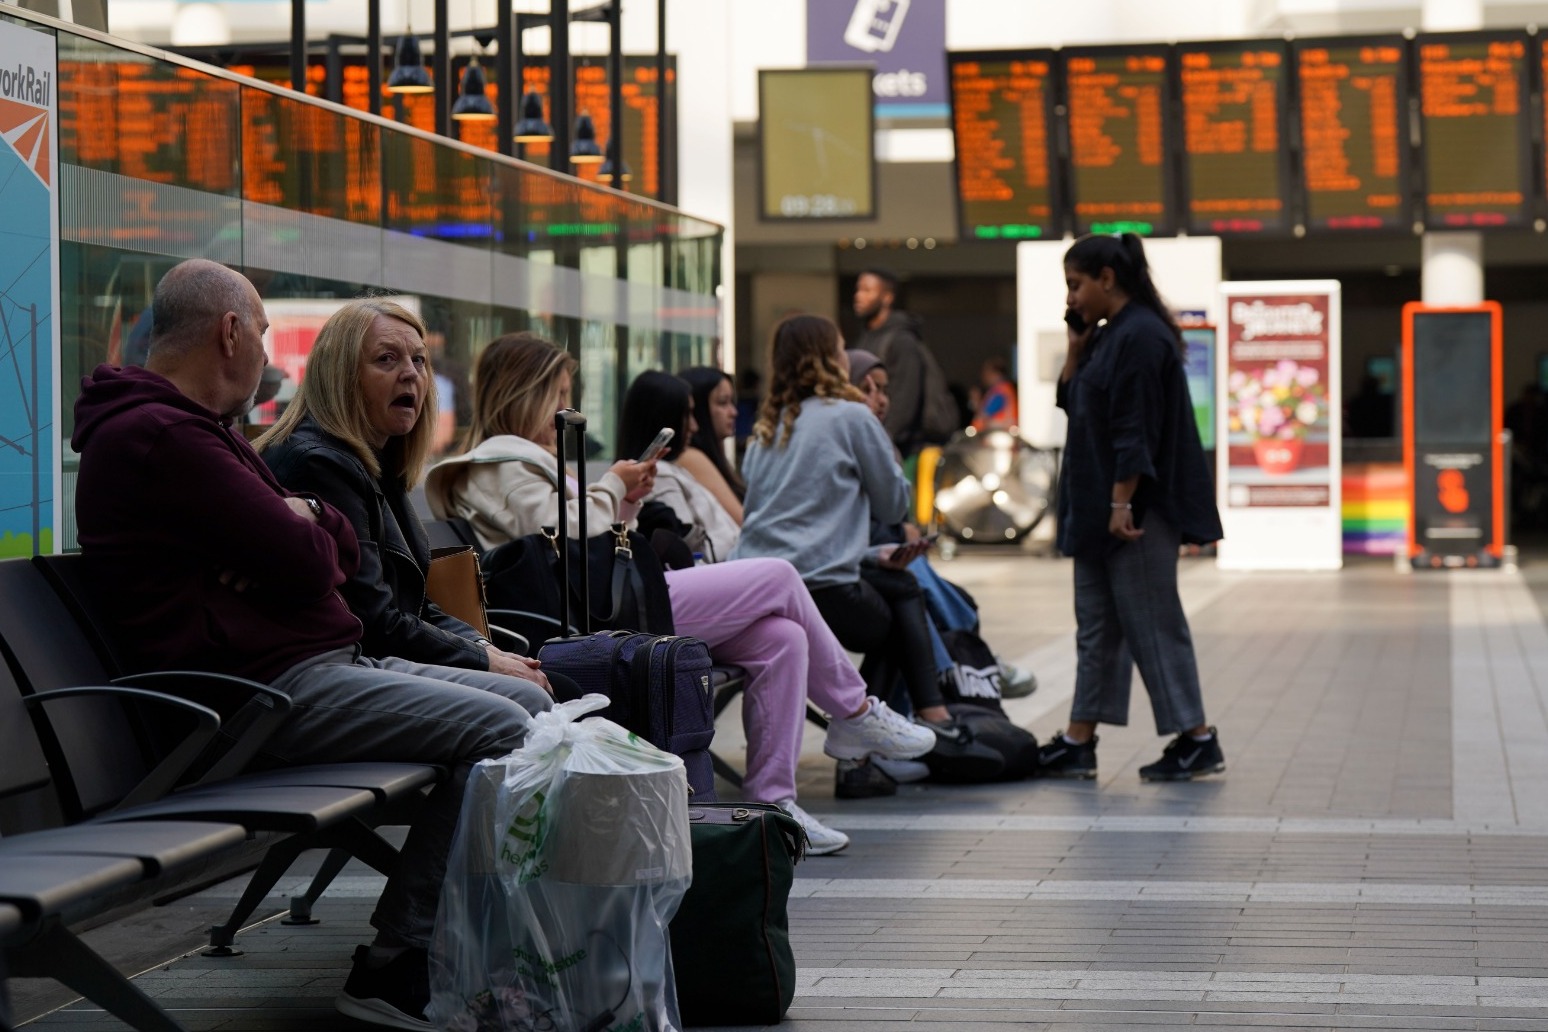 Disruptions to train services continue after 24-hour rail strike 